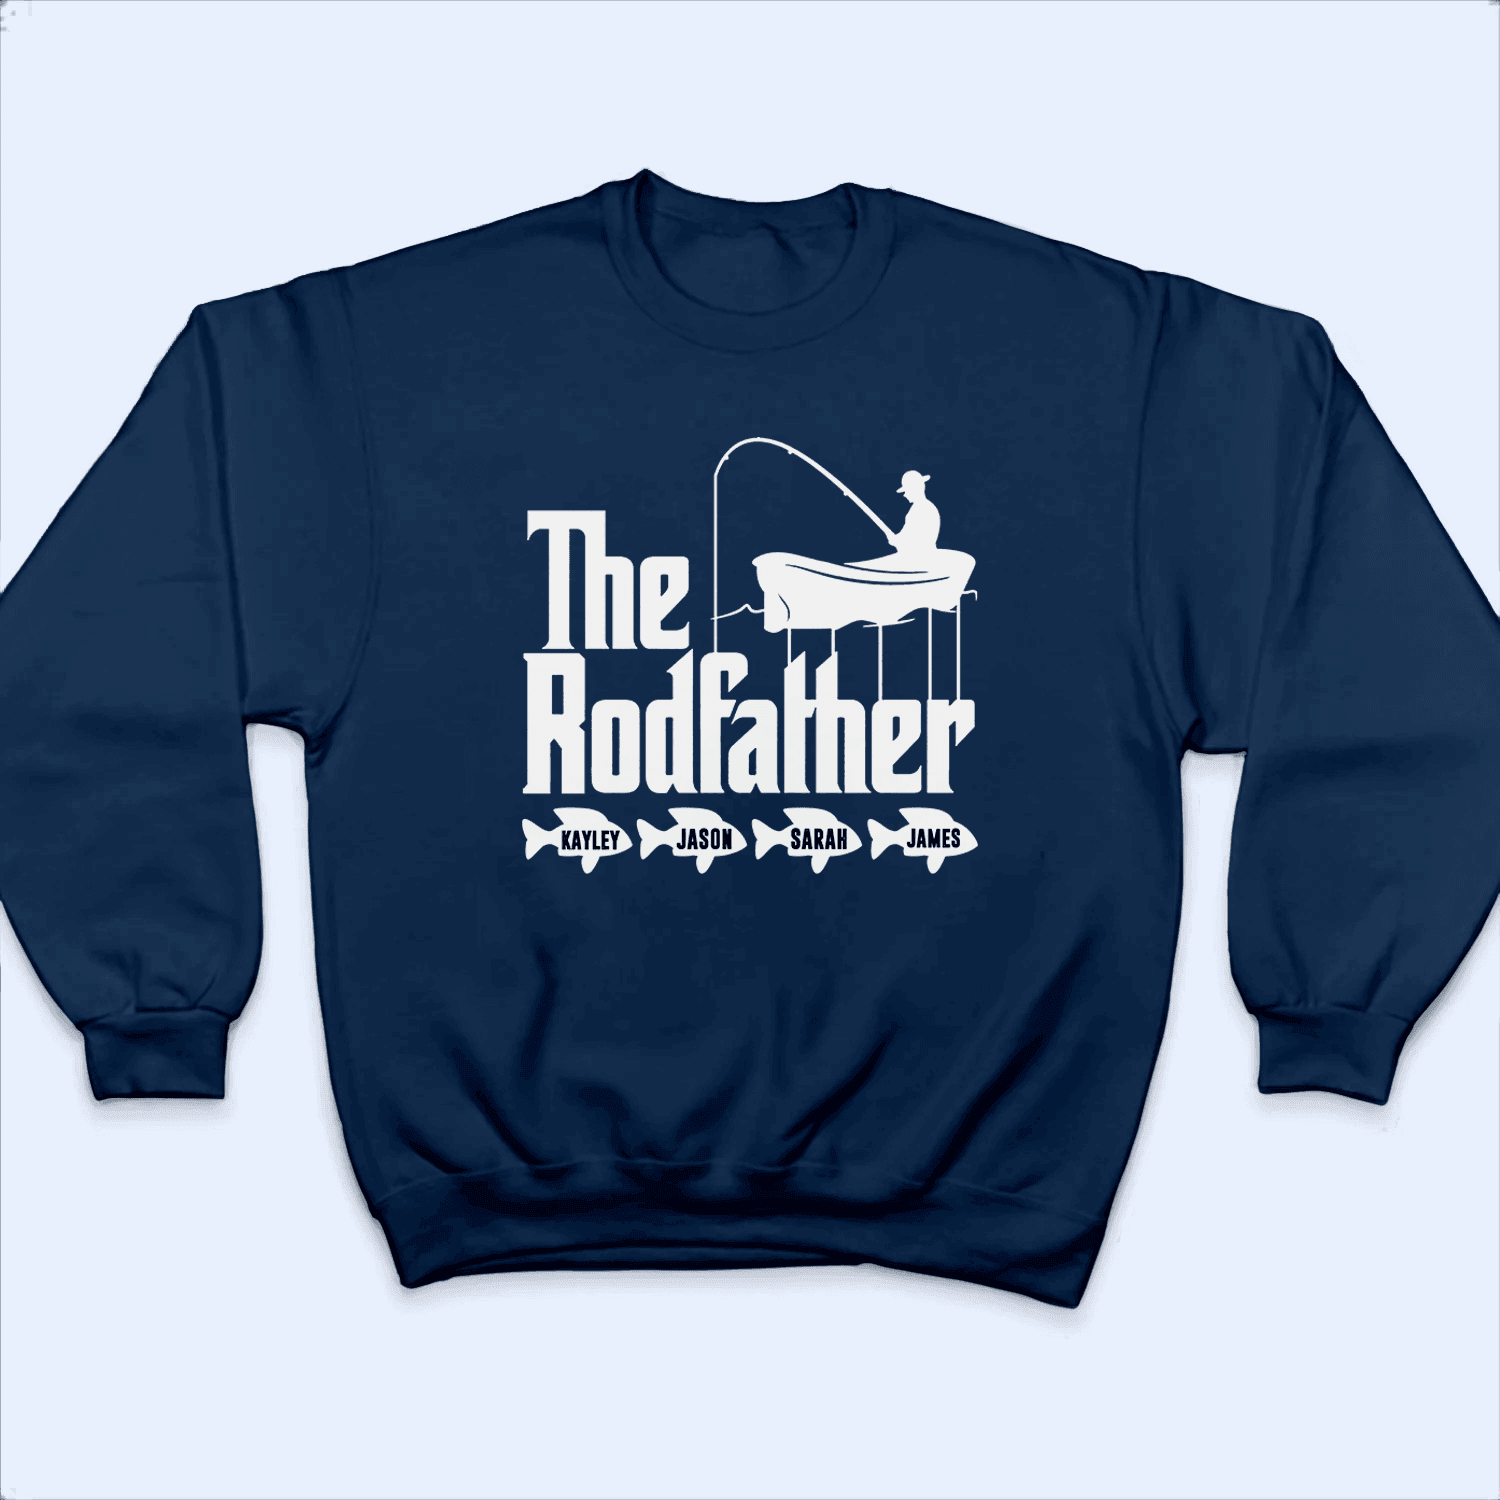 Rodfather Fishing Pun - Funny Fathers Day - Personalized Custom T Shirt - Birthday, Loving, Funny Gift for Grandfather/Dad/Father, Husband, Grandparent - Suzitee Store